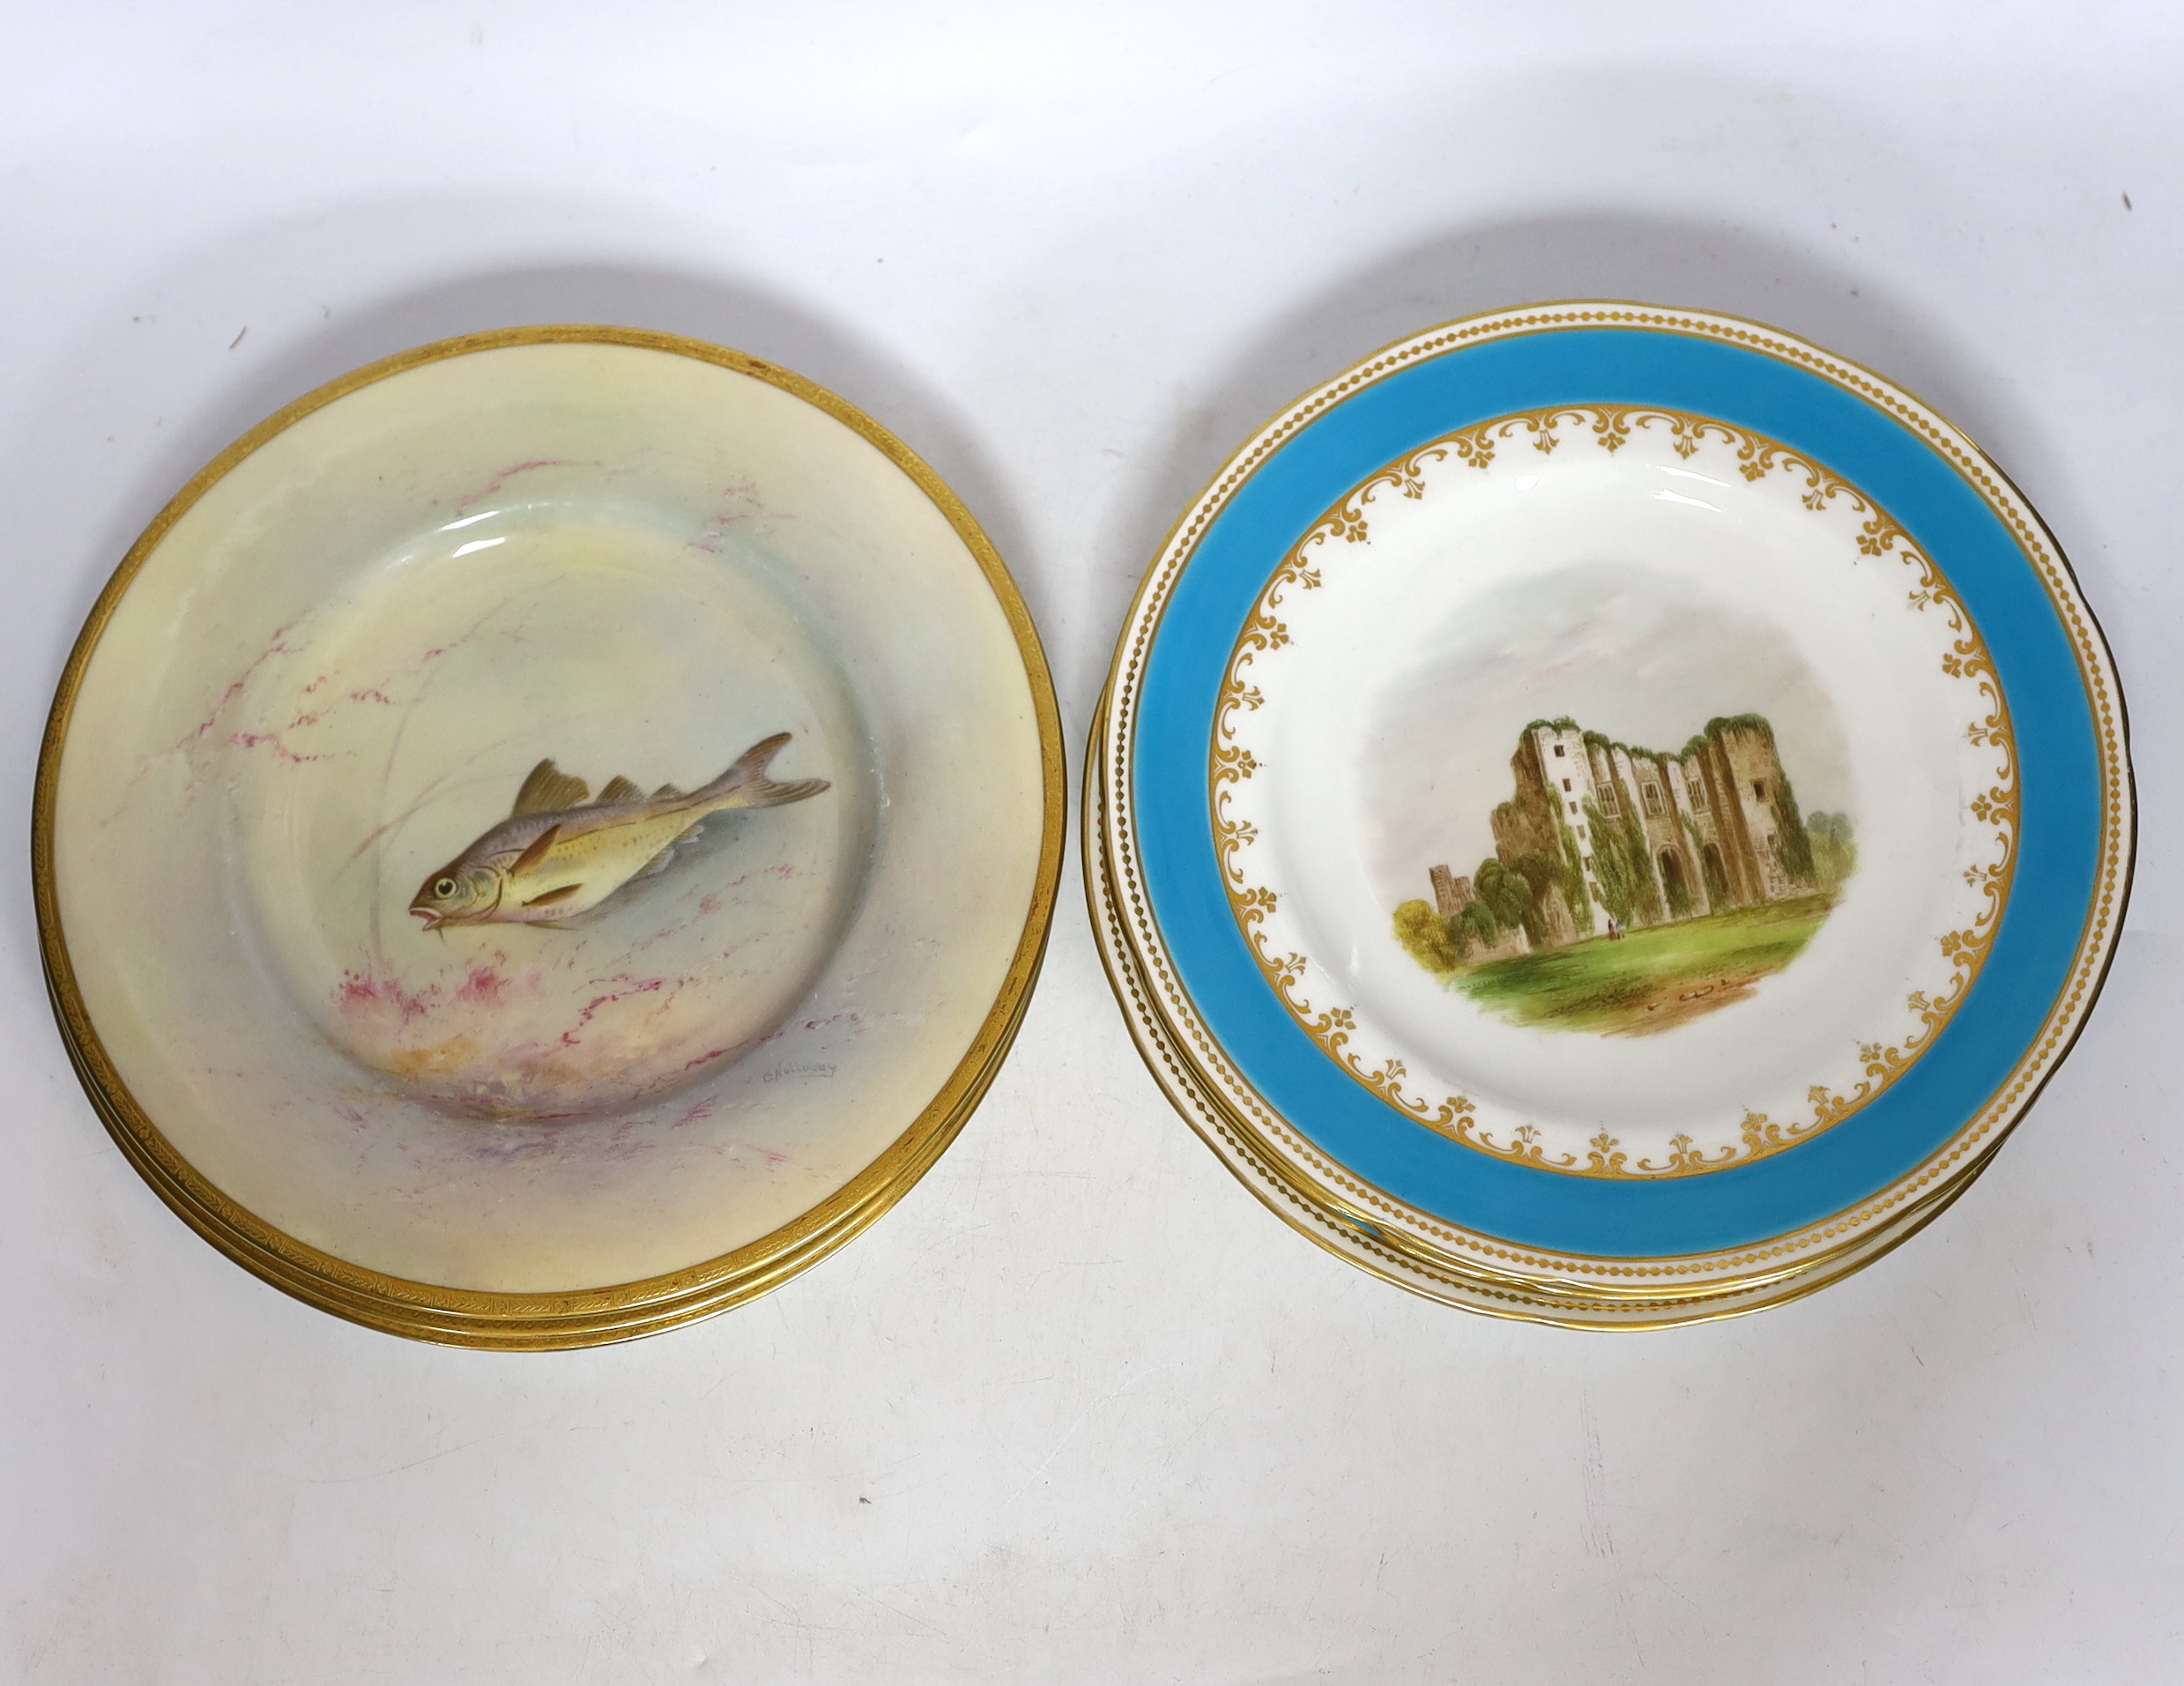 Three Royal Doulton ‘fish’ plates retailed by Ovington and three Minton plates painted with views of buildings